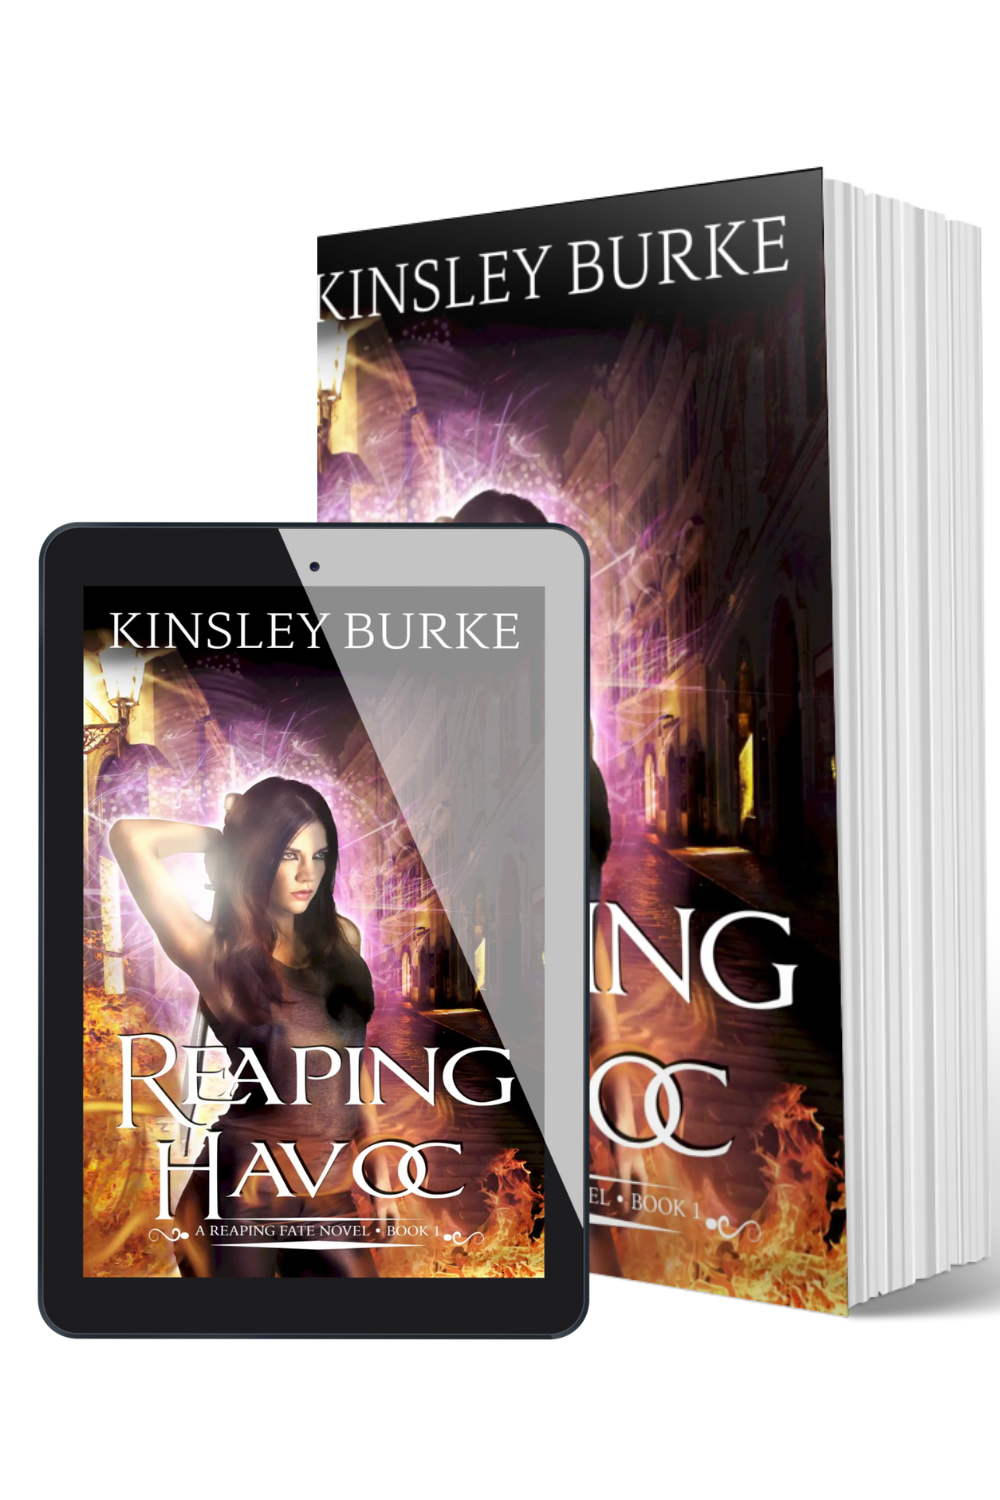 Cover Image of Reaping Havoc book 1 by Kinsley Burke